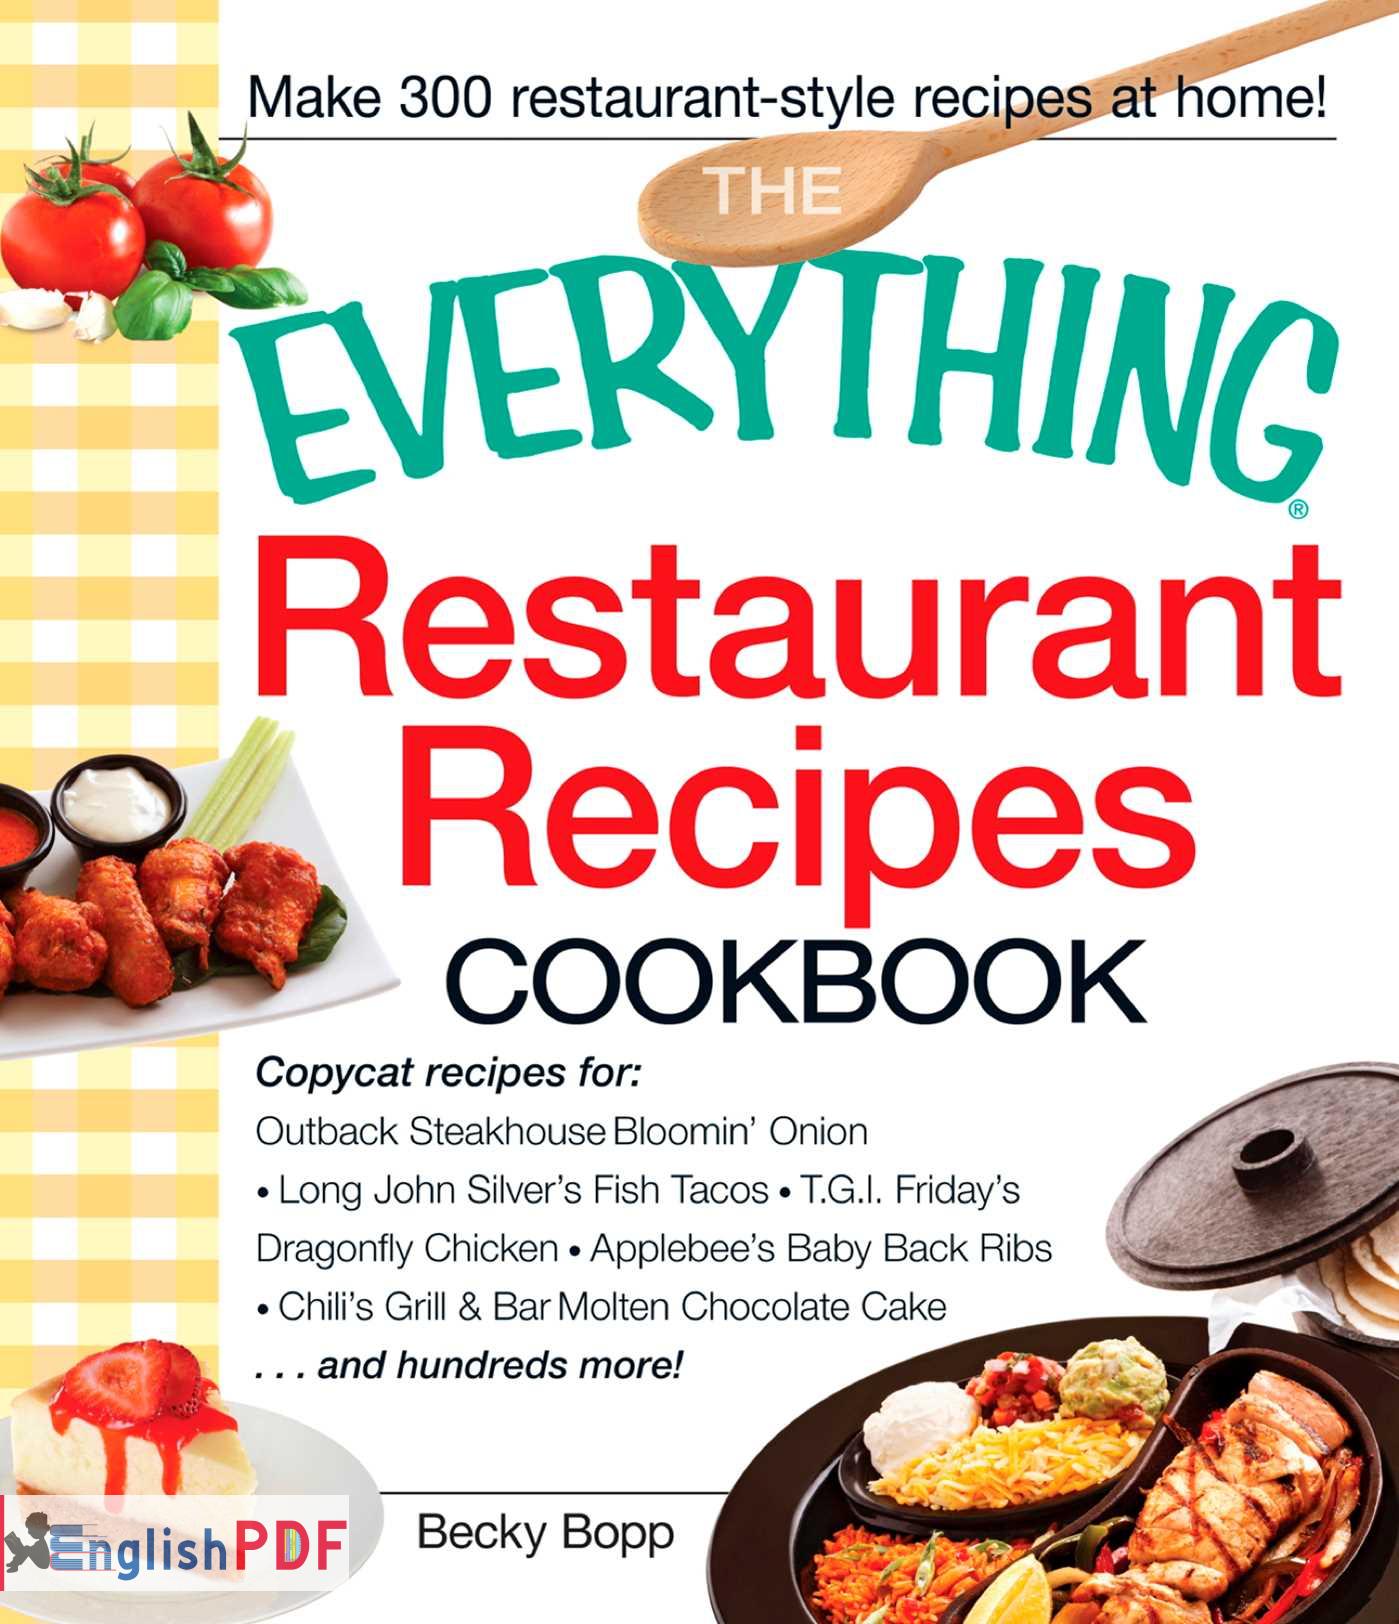 Home cooking book pdf free download windows 8 iso download